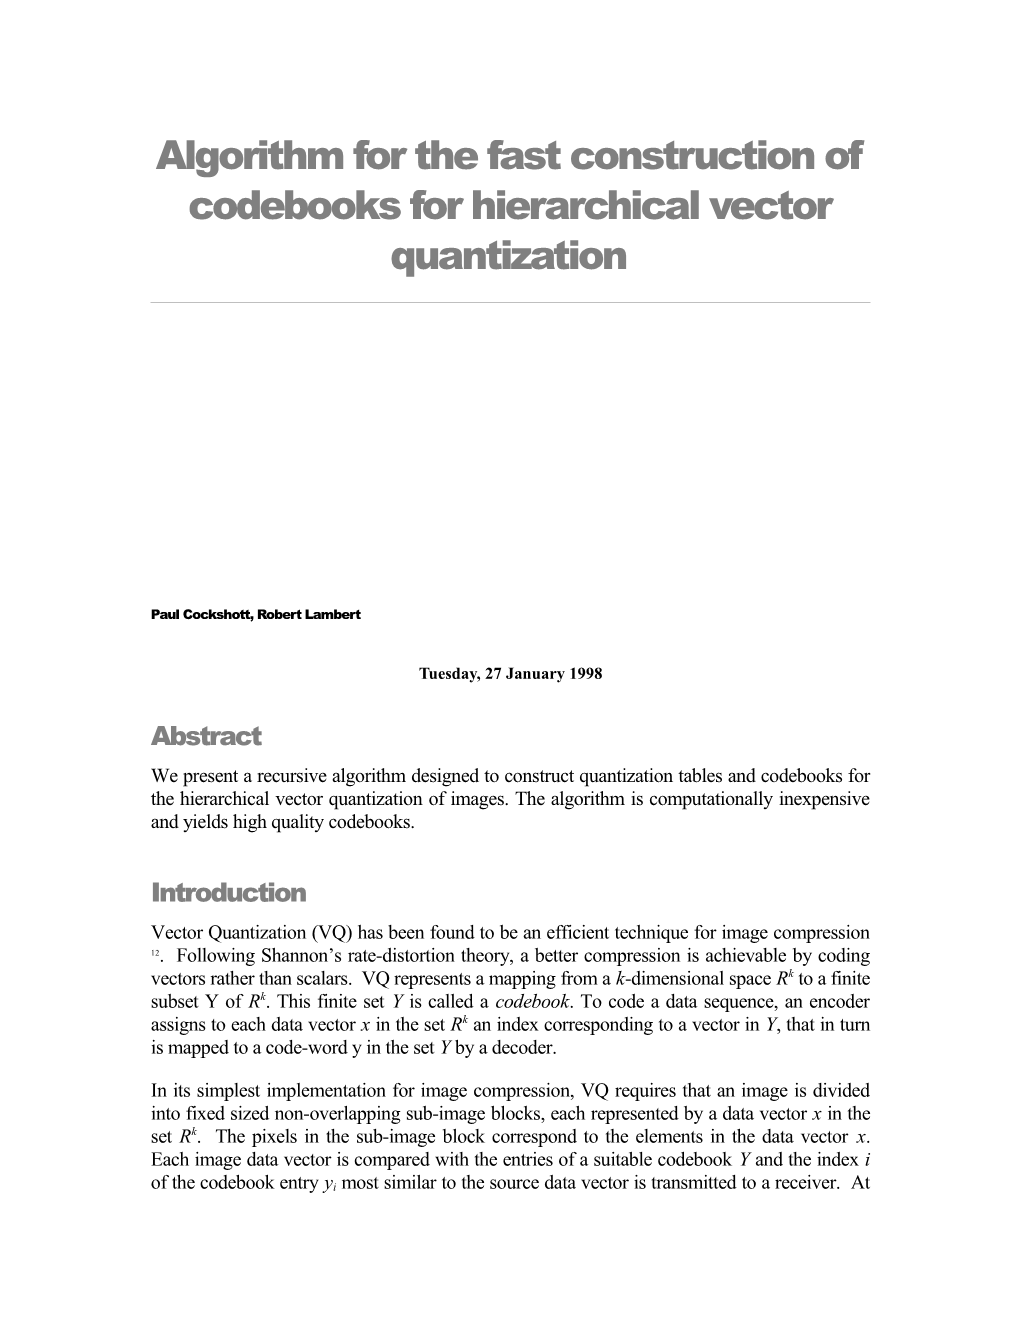 Algorithms for the Simultaneous Construction of Codebooks and Index Tables for Hierarchical